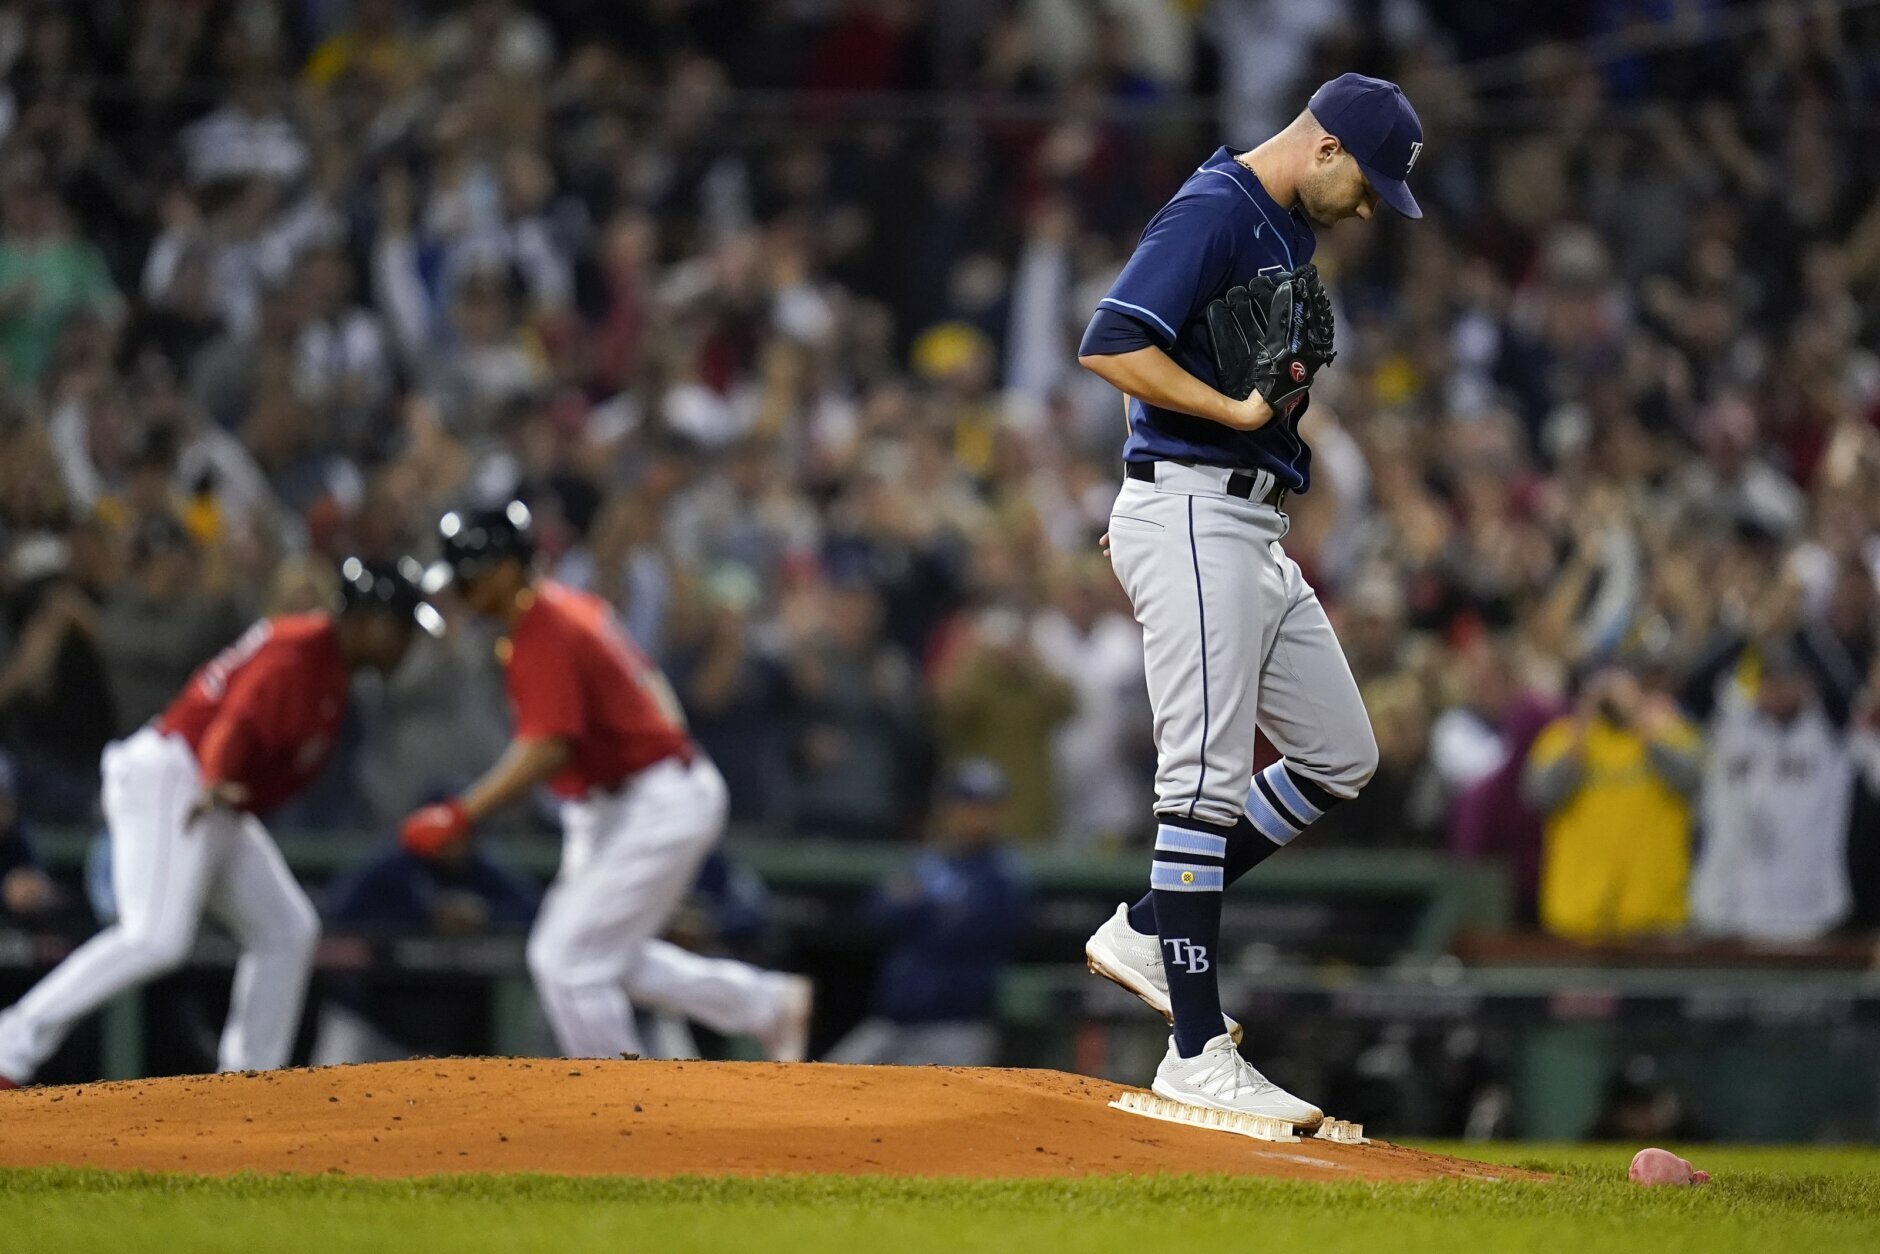 Rays clinch wild card after walkoff home run in 12th - The Boston